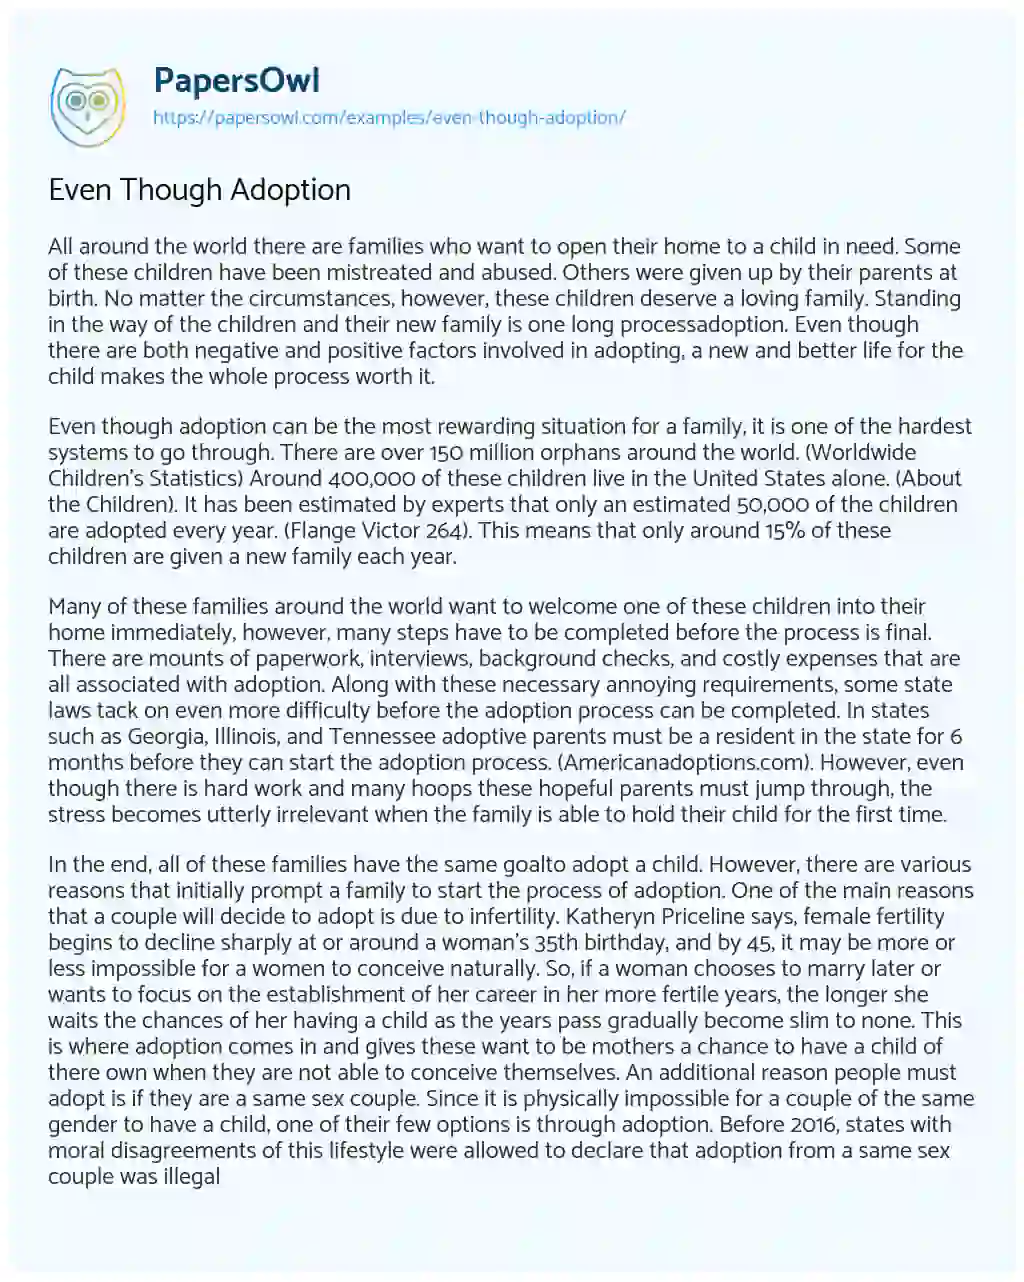 Essay on Even Though Adoption